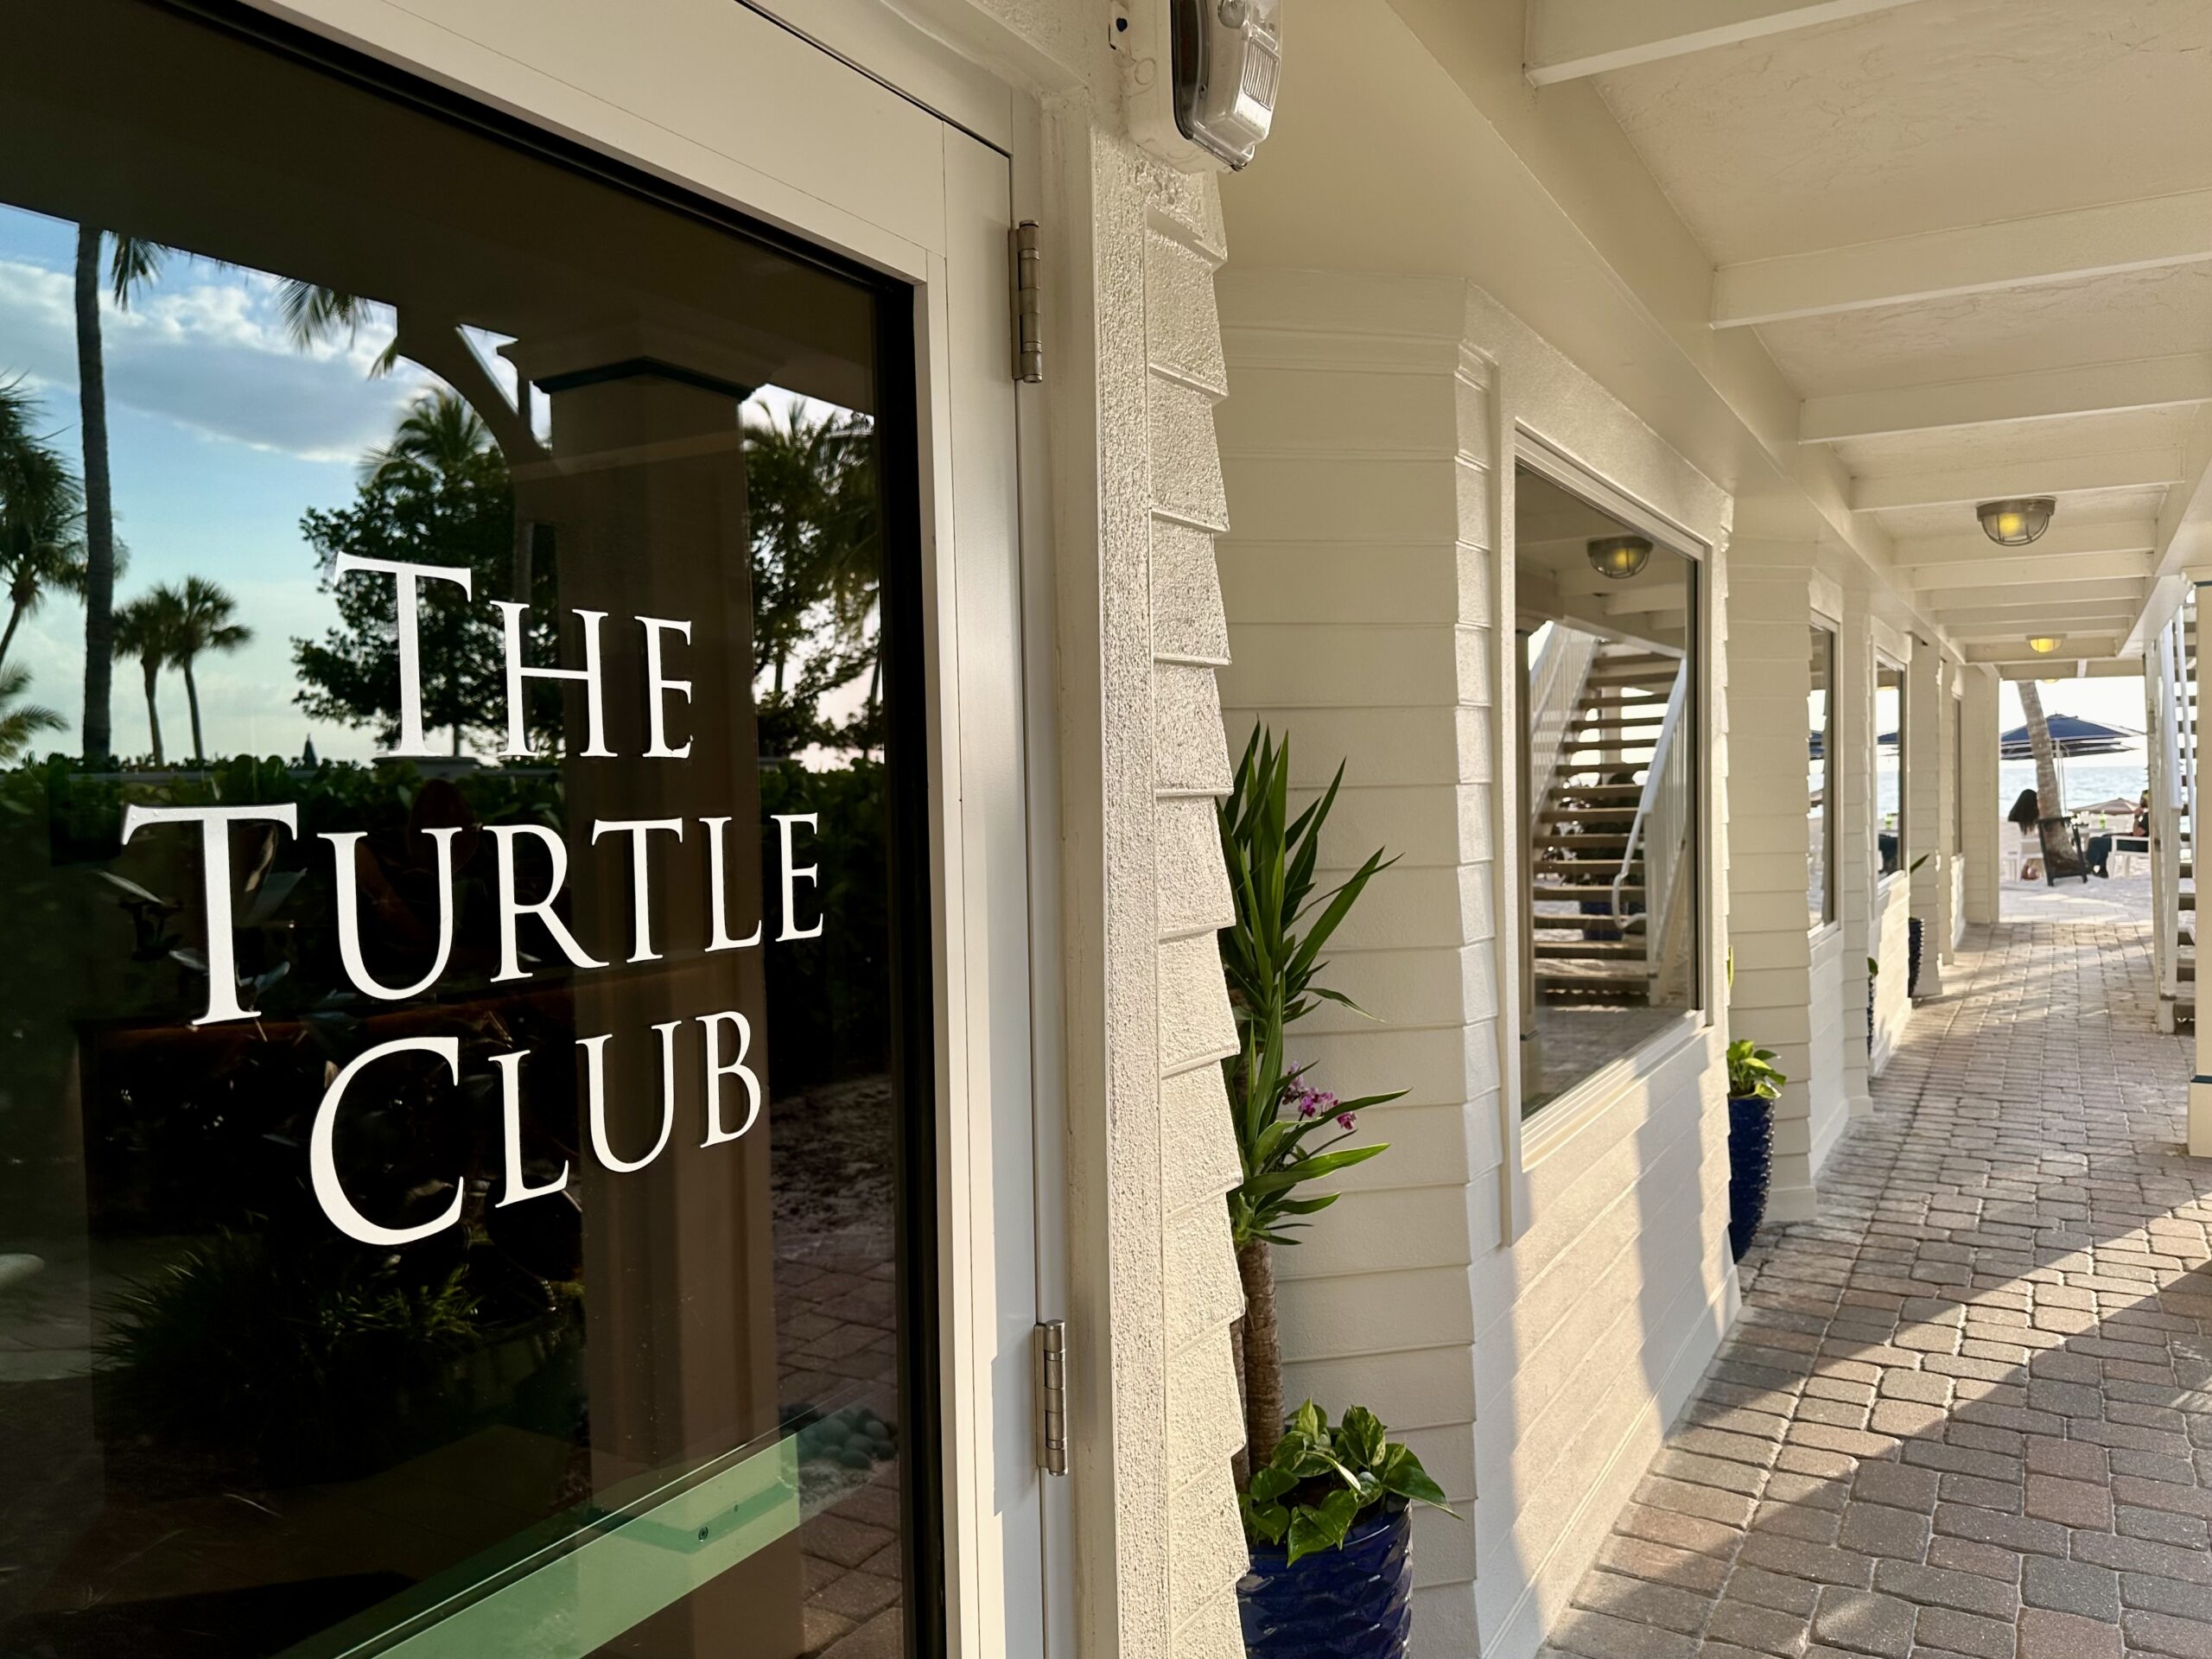 The Turtle Club reopened after being damaged by Hurricane Ian in 2022.